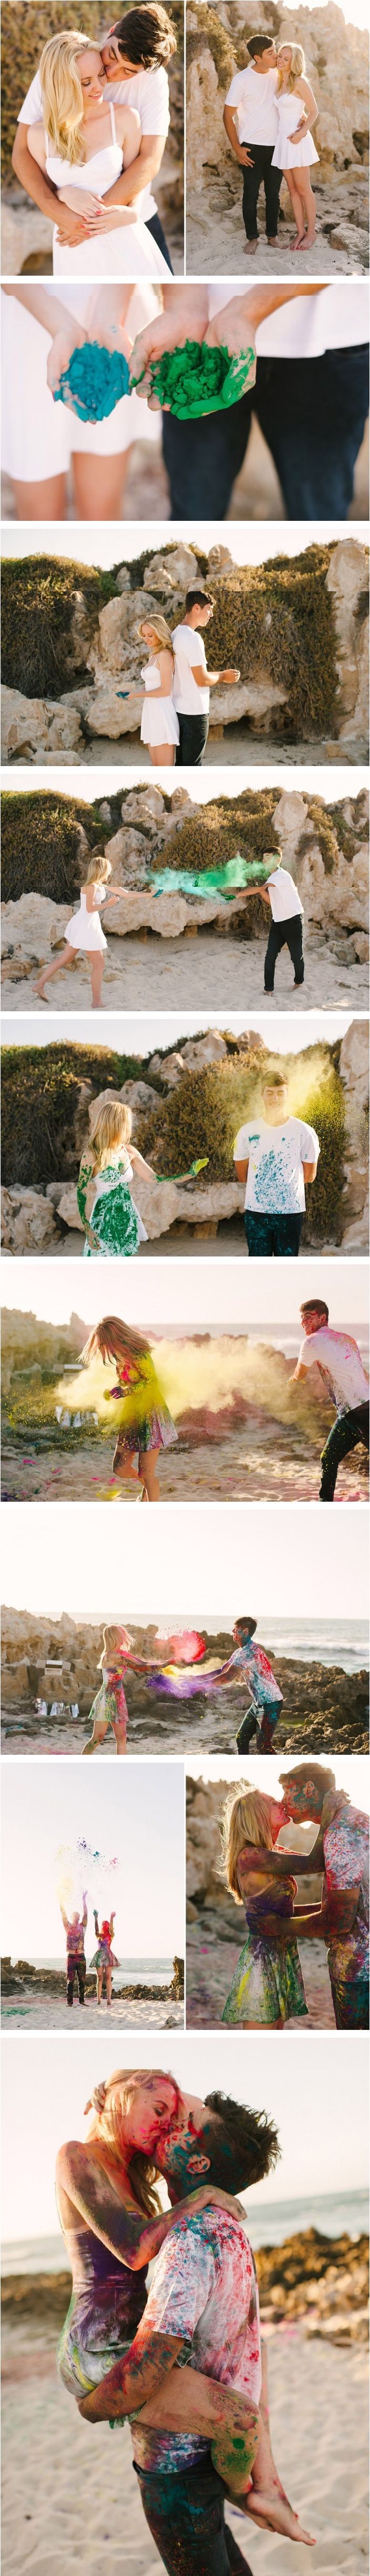 Paint fight engagement shoot. Need I say more?!?!